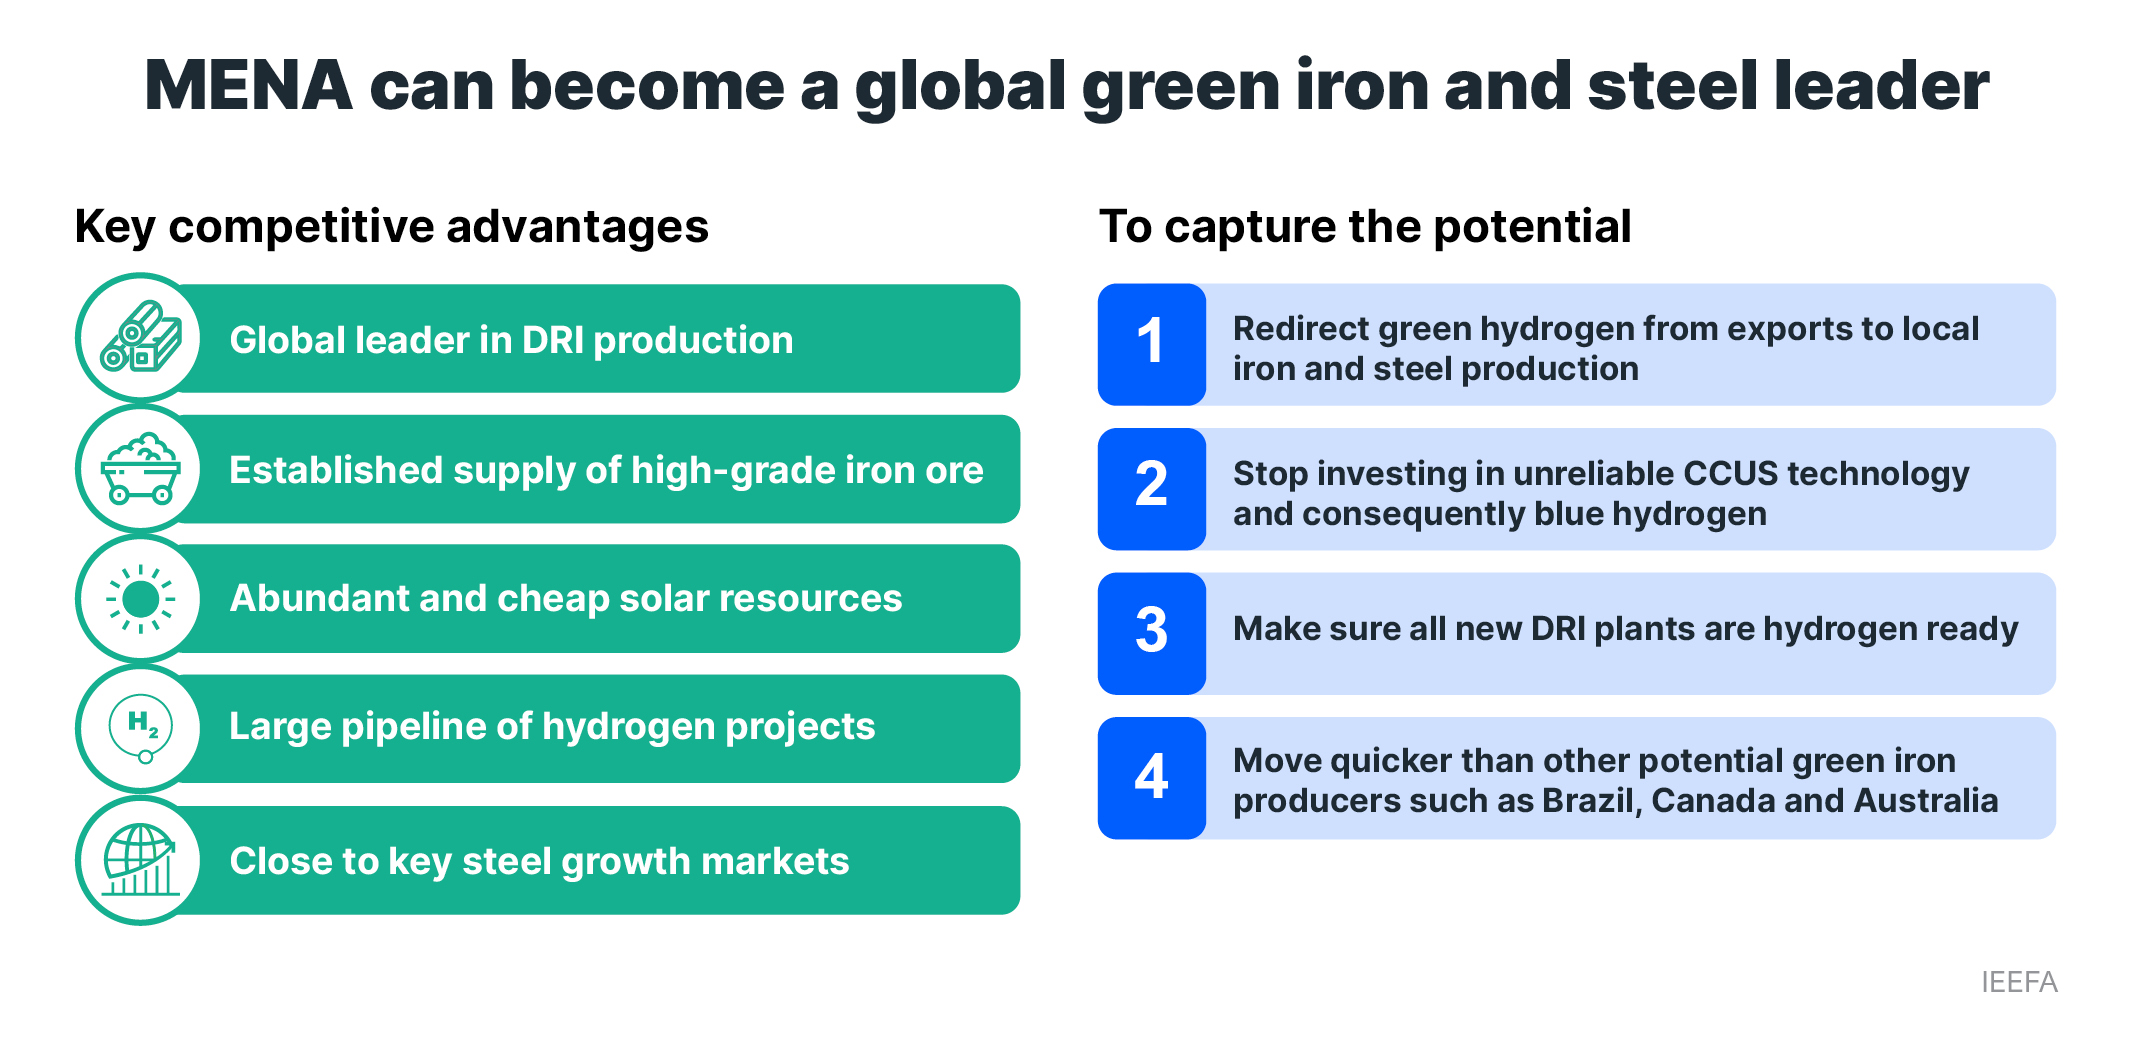 What is Green Steel?